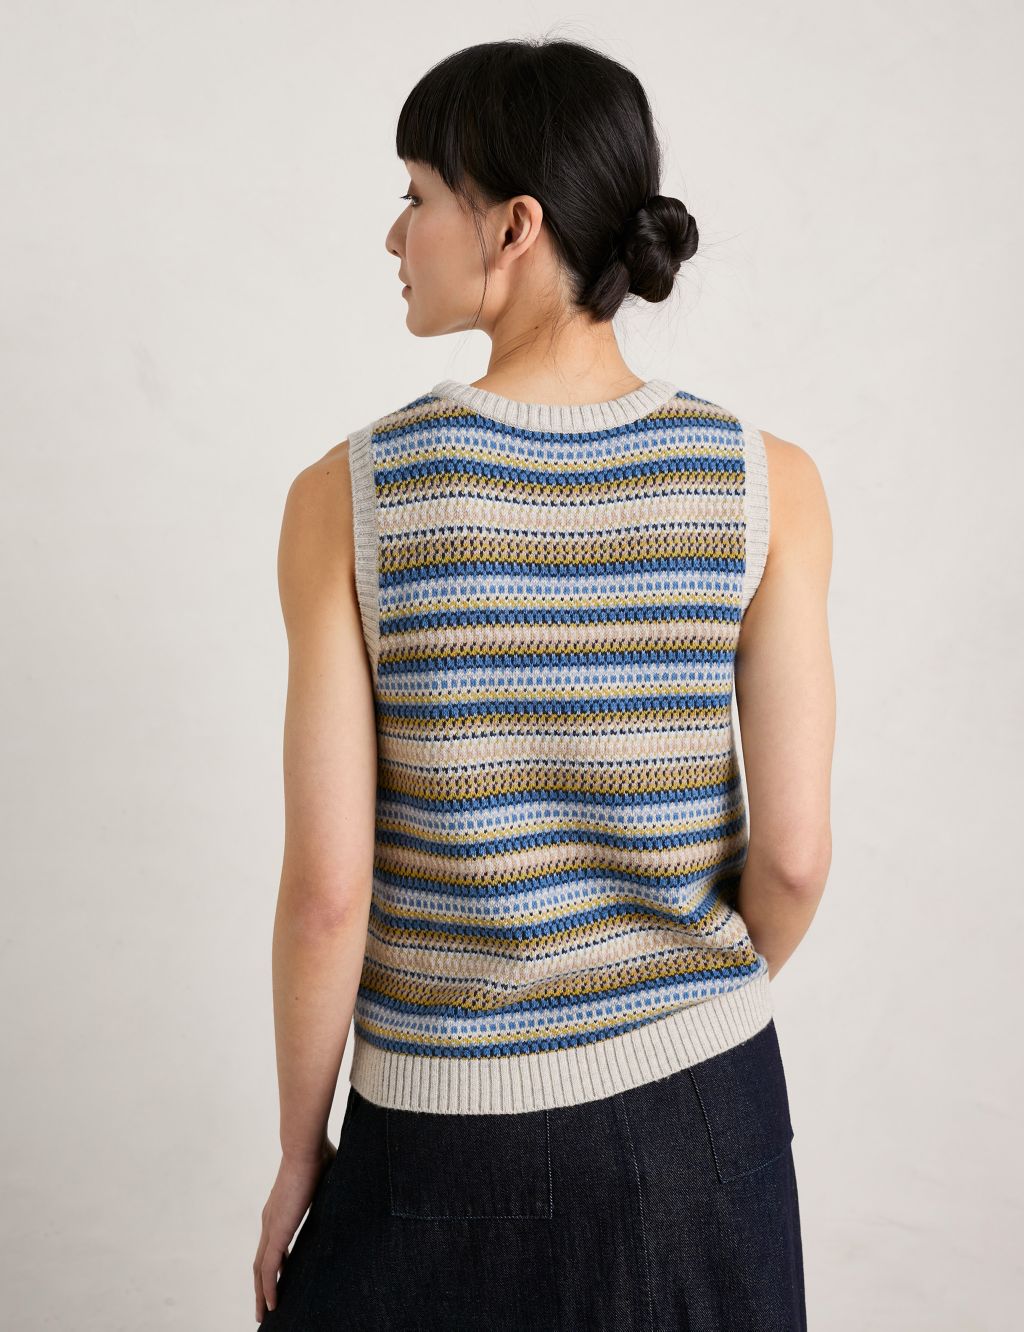 Fair Isle Round Neck Knitted Top with Wool image 5